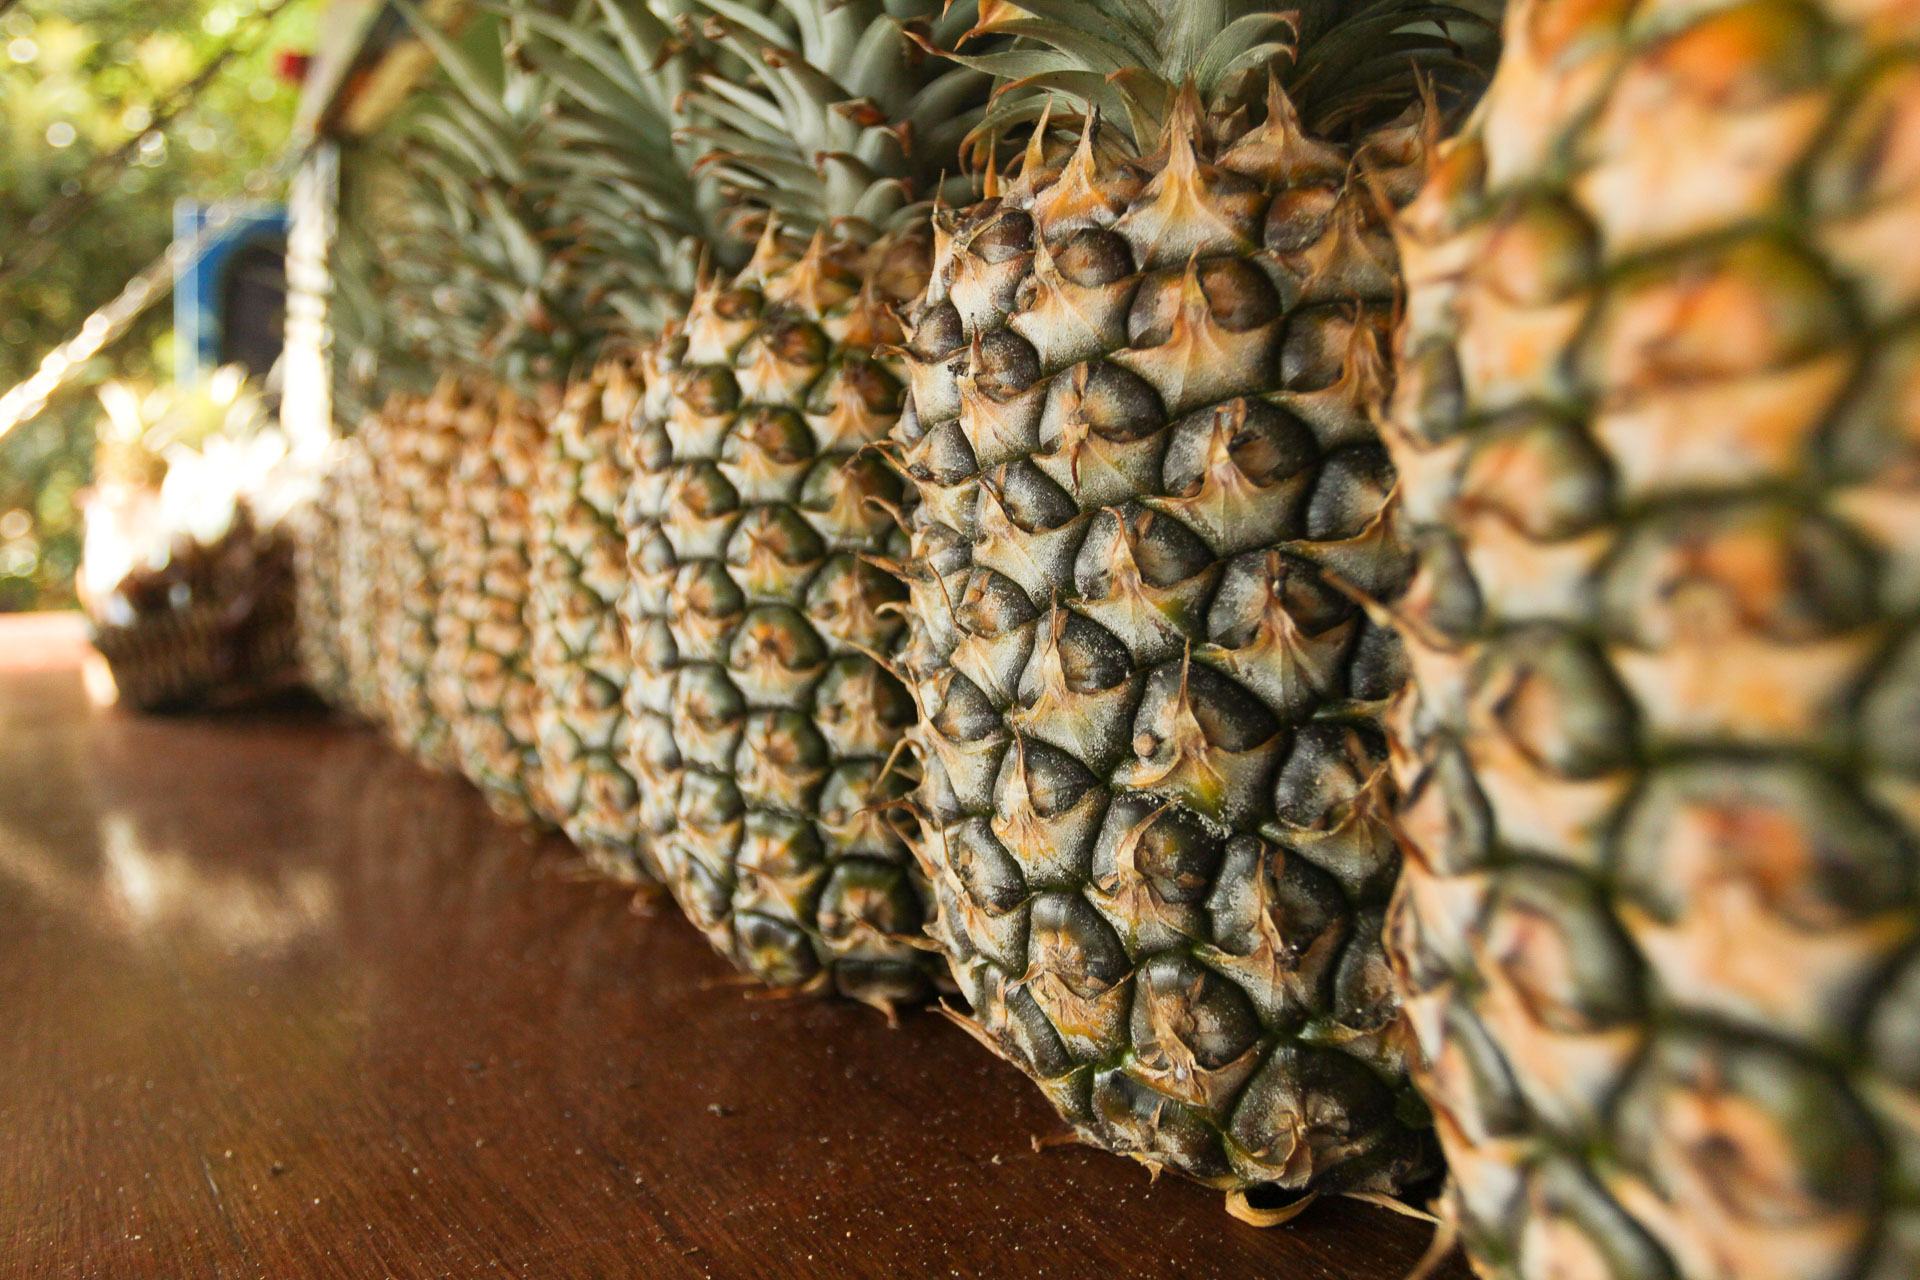 where do pineapples come from and why does the pineapple fruit have spiny leaves on the outside